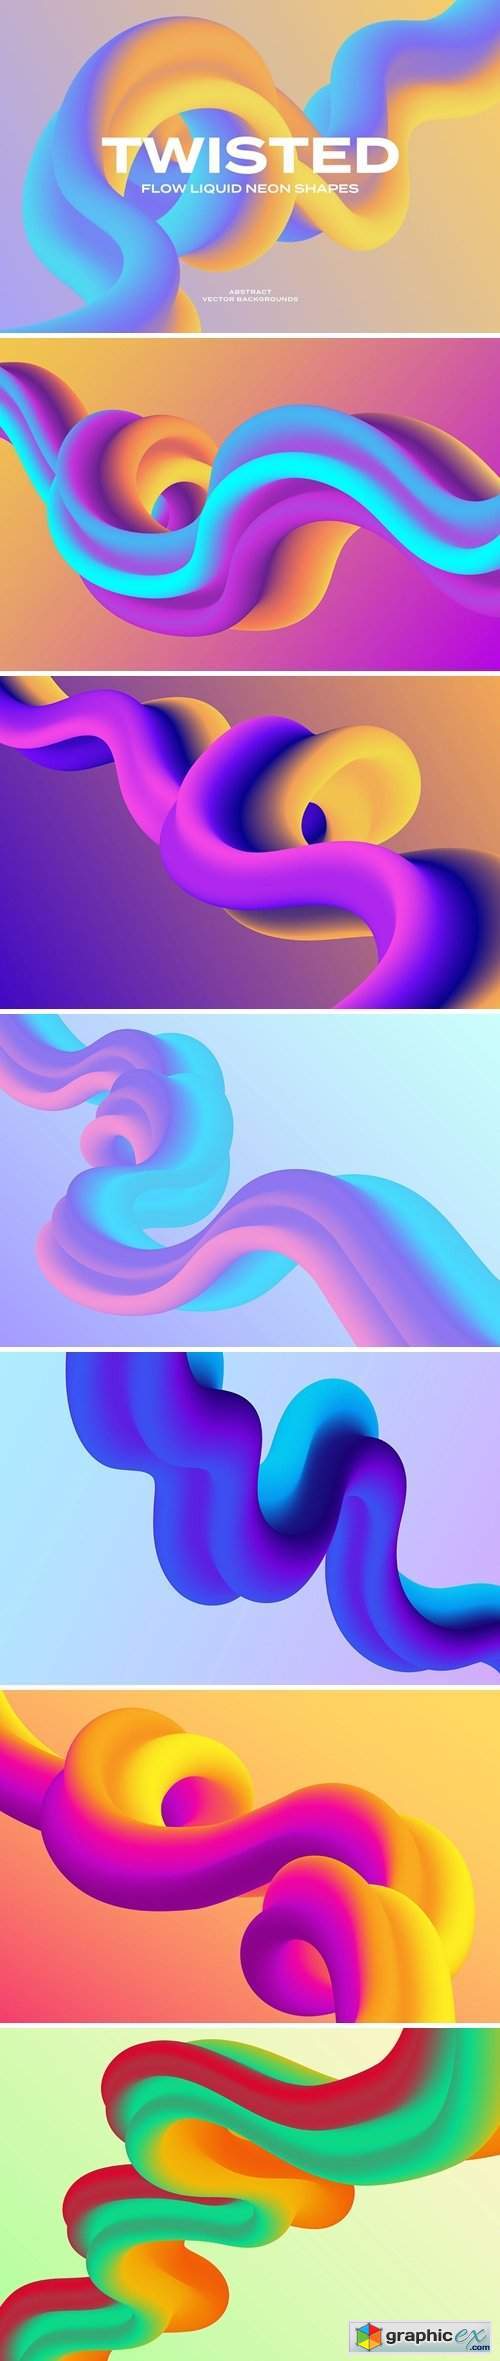 Twisted Neon Shapes Vector Backgrounds